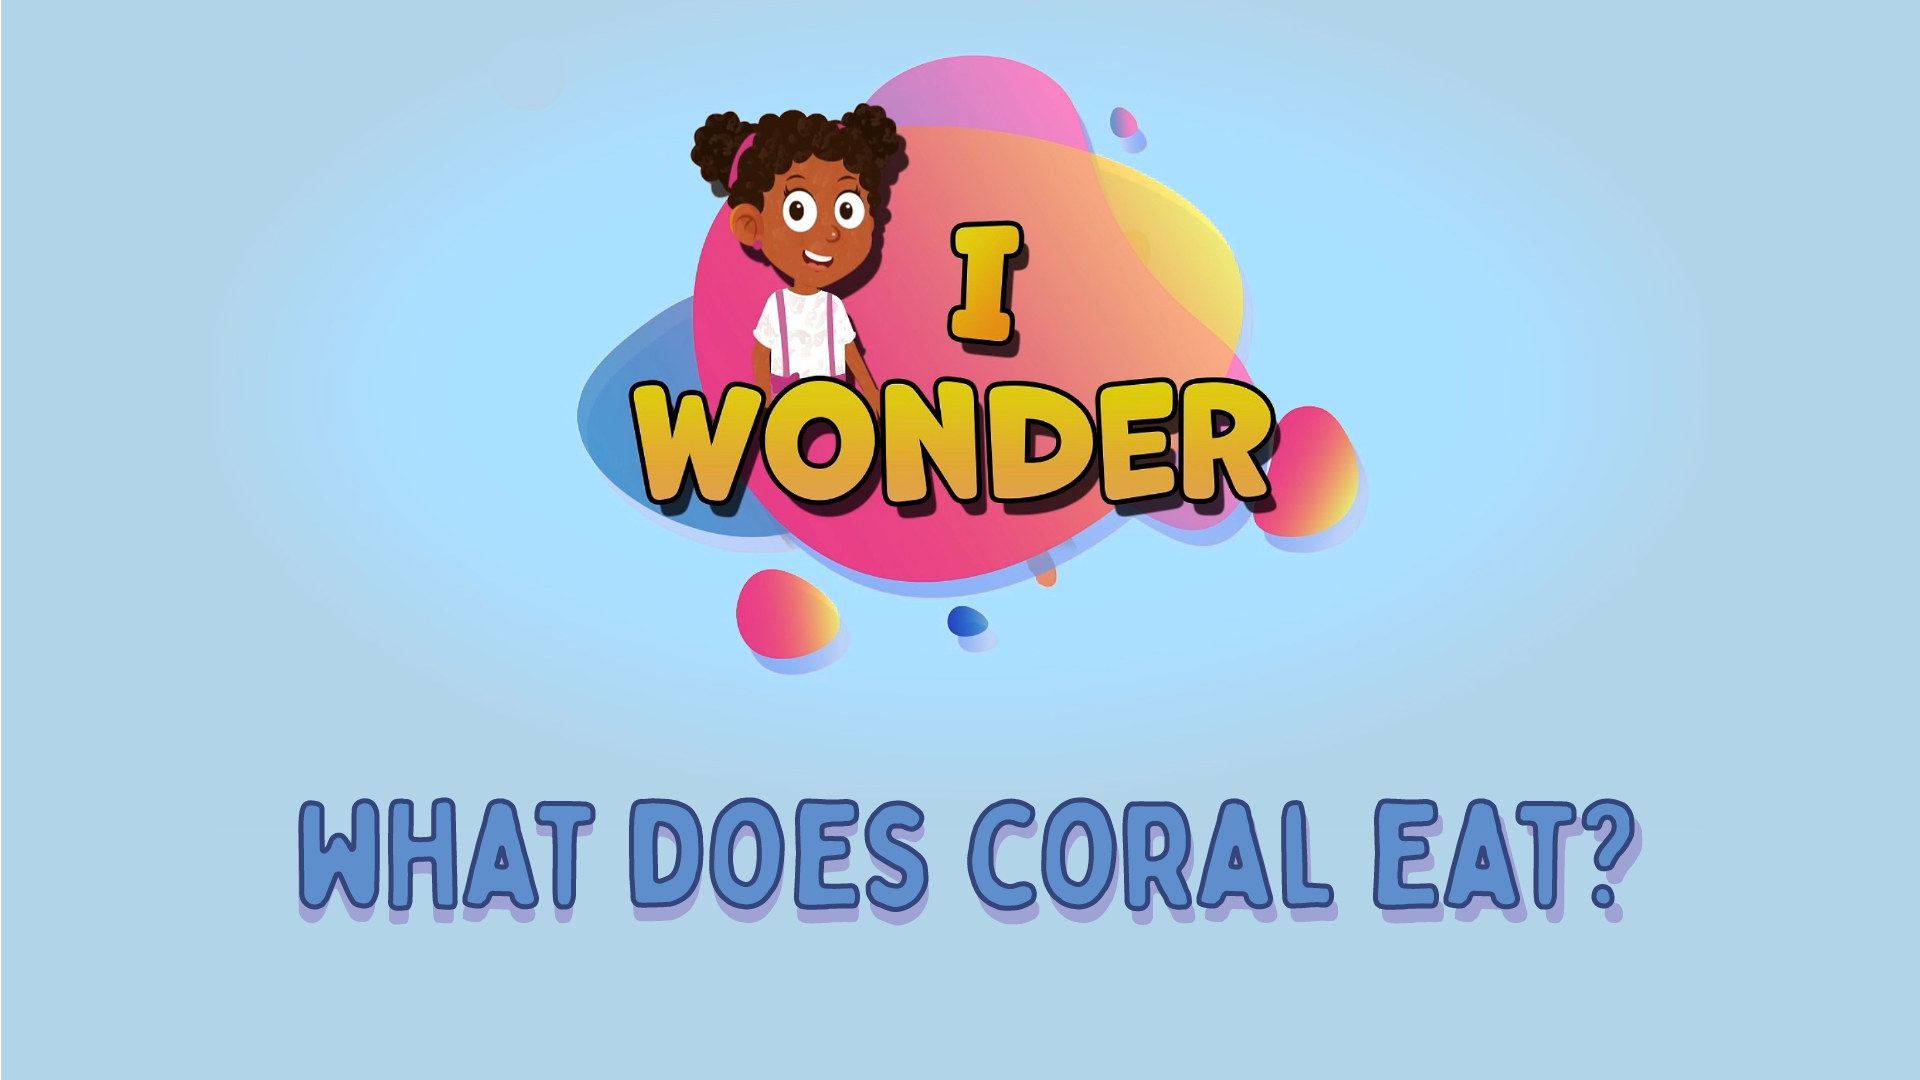 What Does Coral Eat?